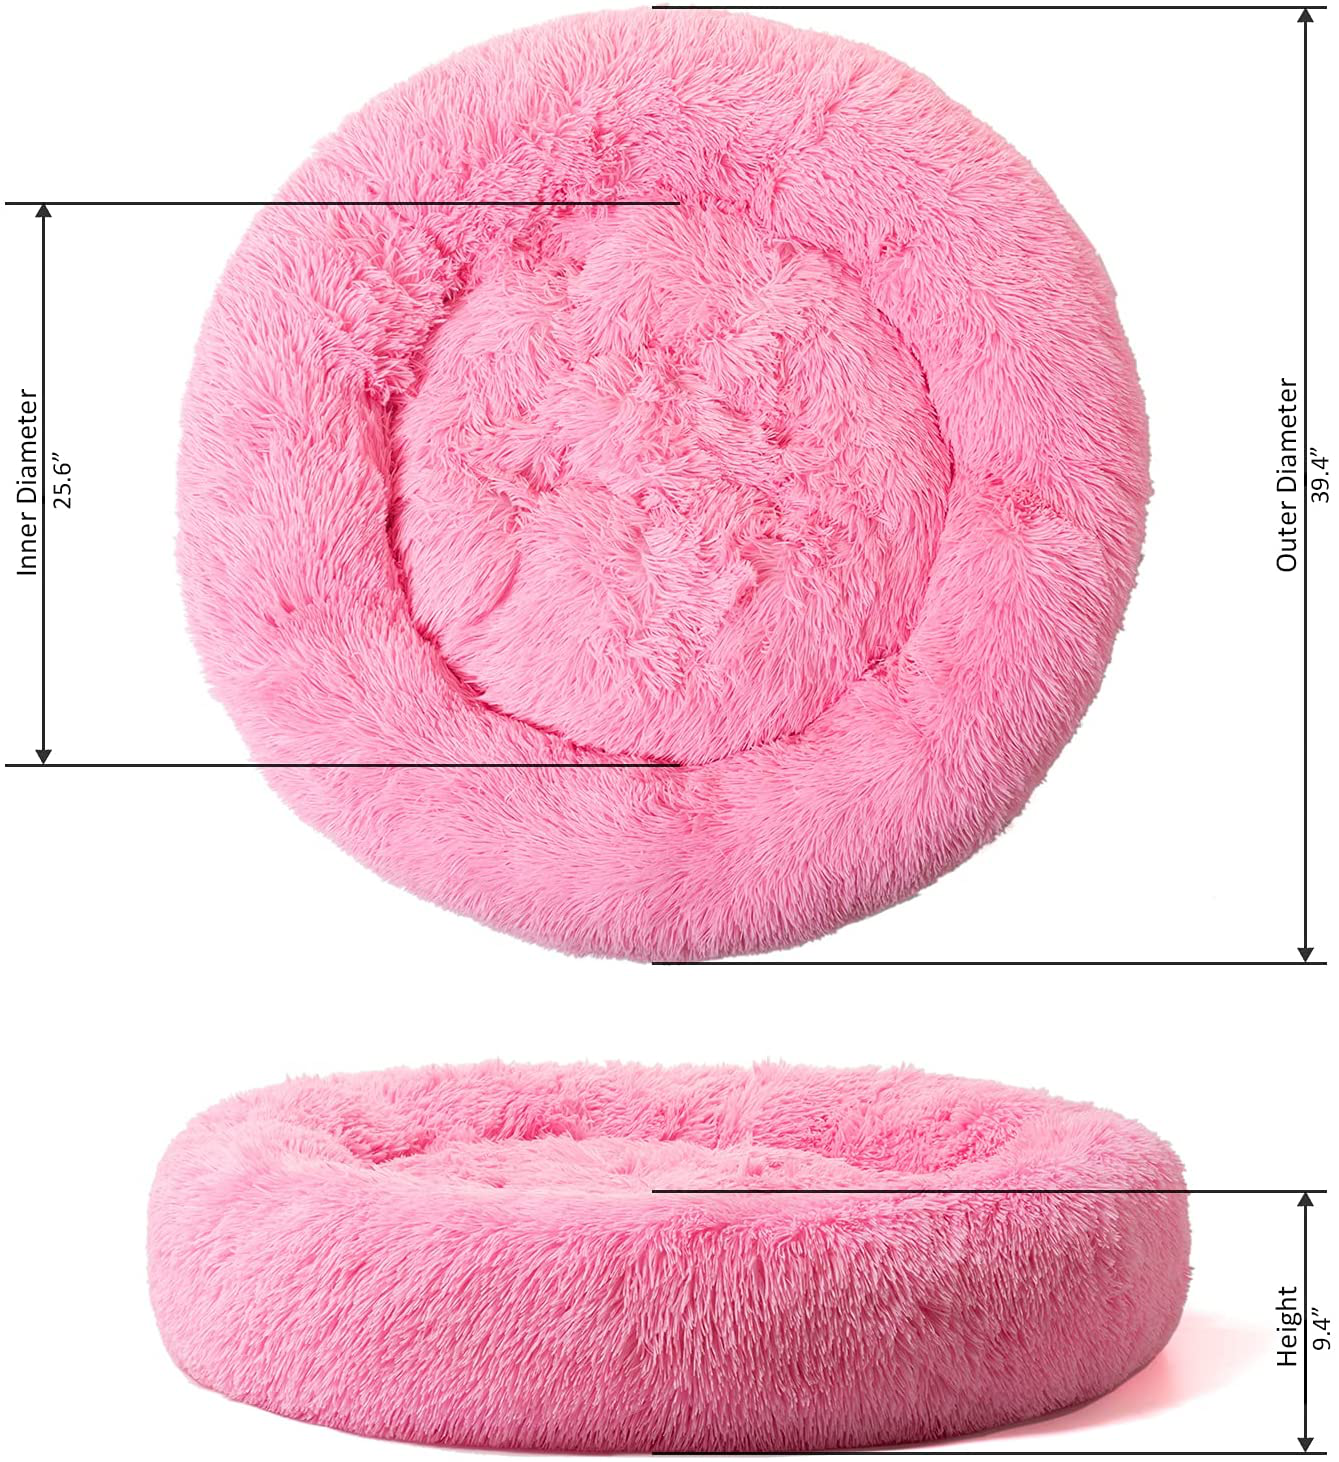 Dancewhale Cat Bed Donut Cuddler, Flurry Warming round Plush Cushion Mat for Small Medium Large Dogs and Cats, Indoor Sleeping Bed